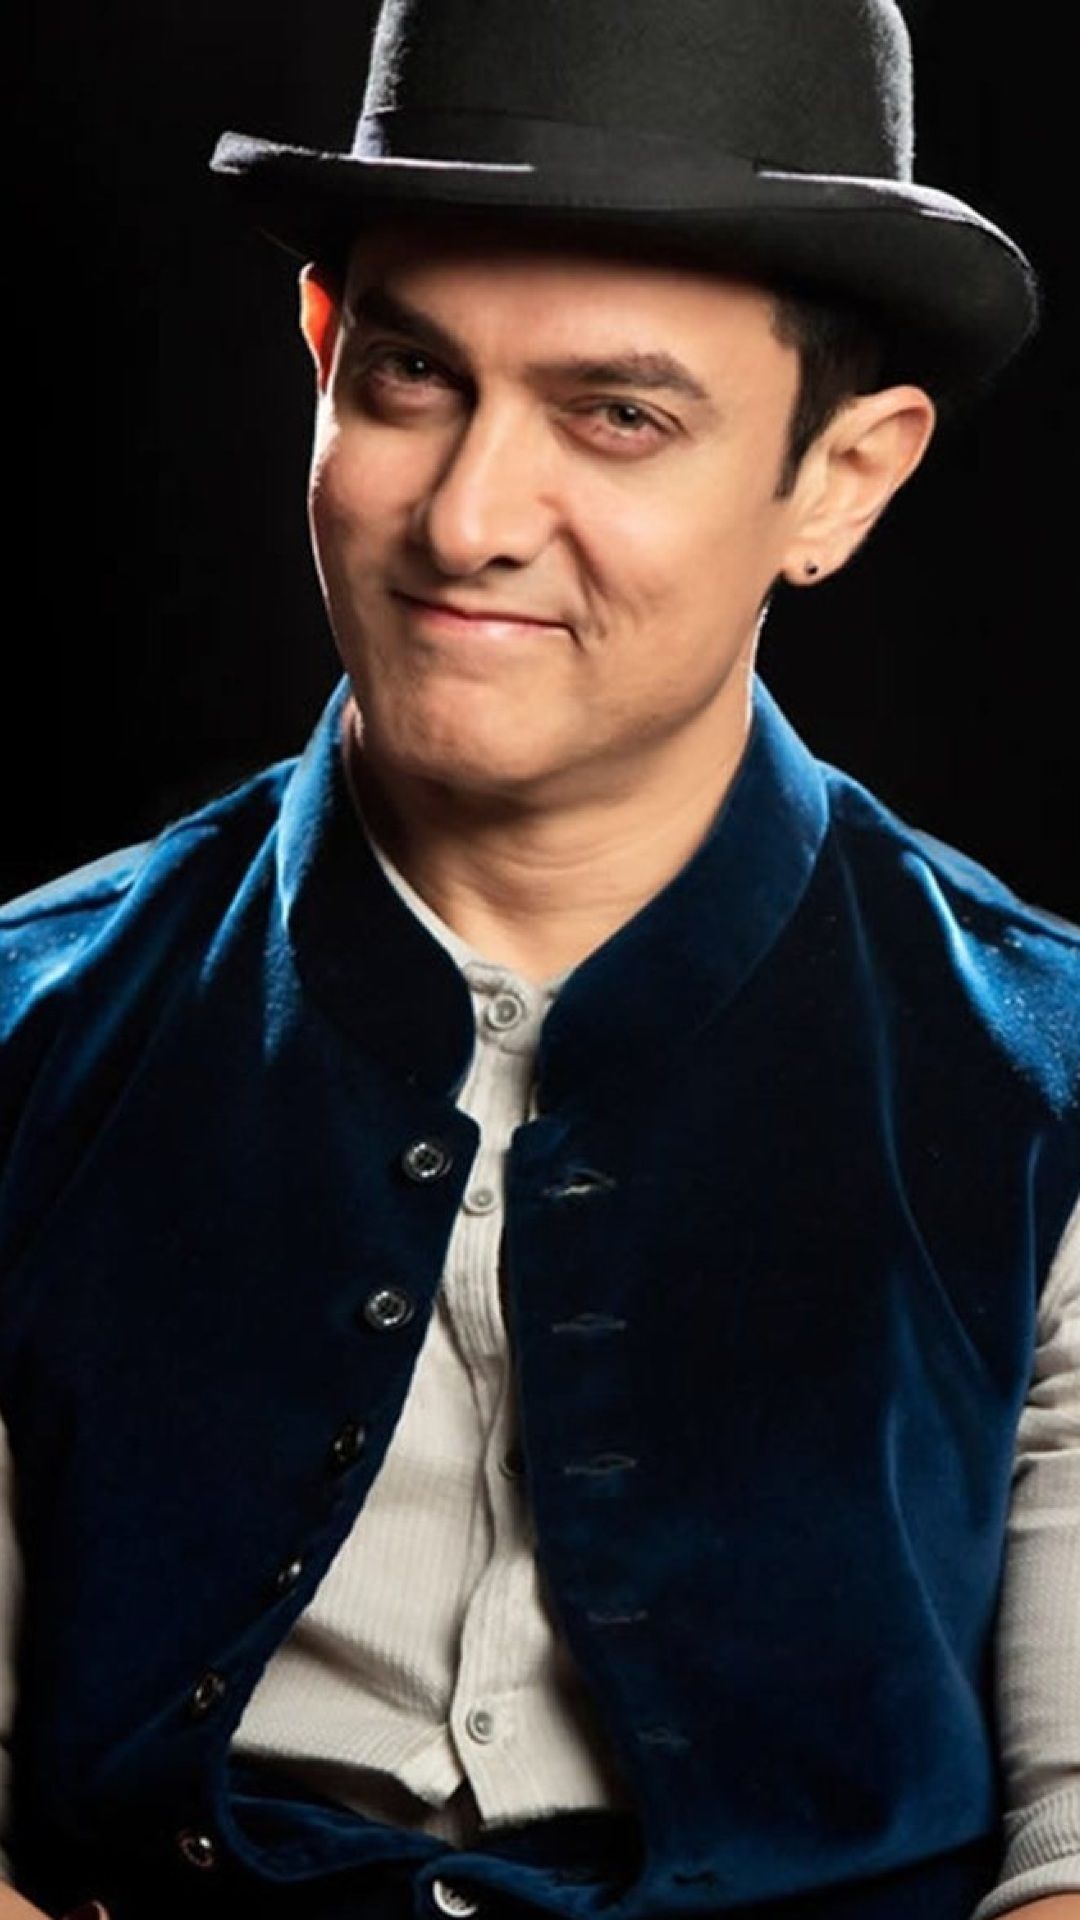 ✓[185+] Aamir Khan in Dhoom wallpaper - Android / iPhone HD Wallpaper  Background Download (png / jpg) (2023)